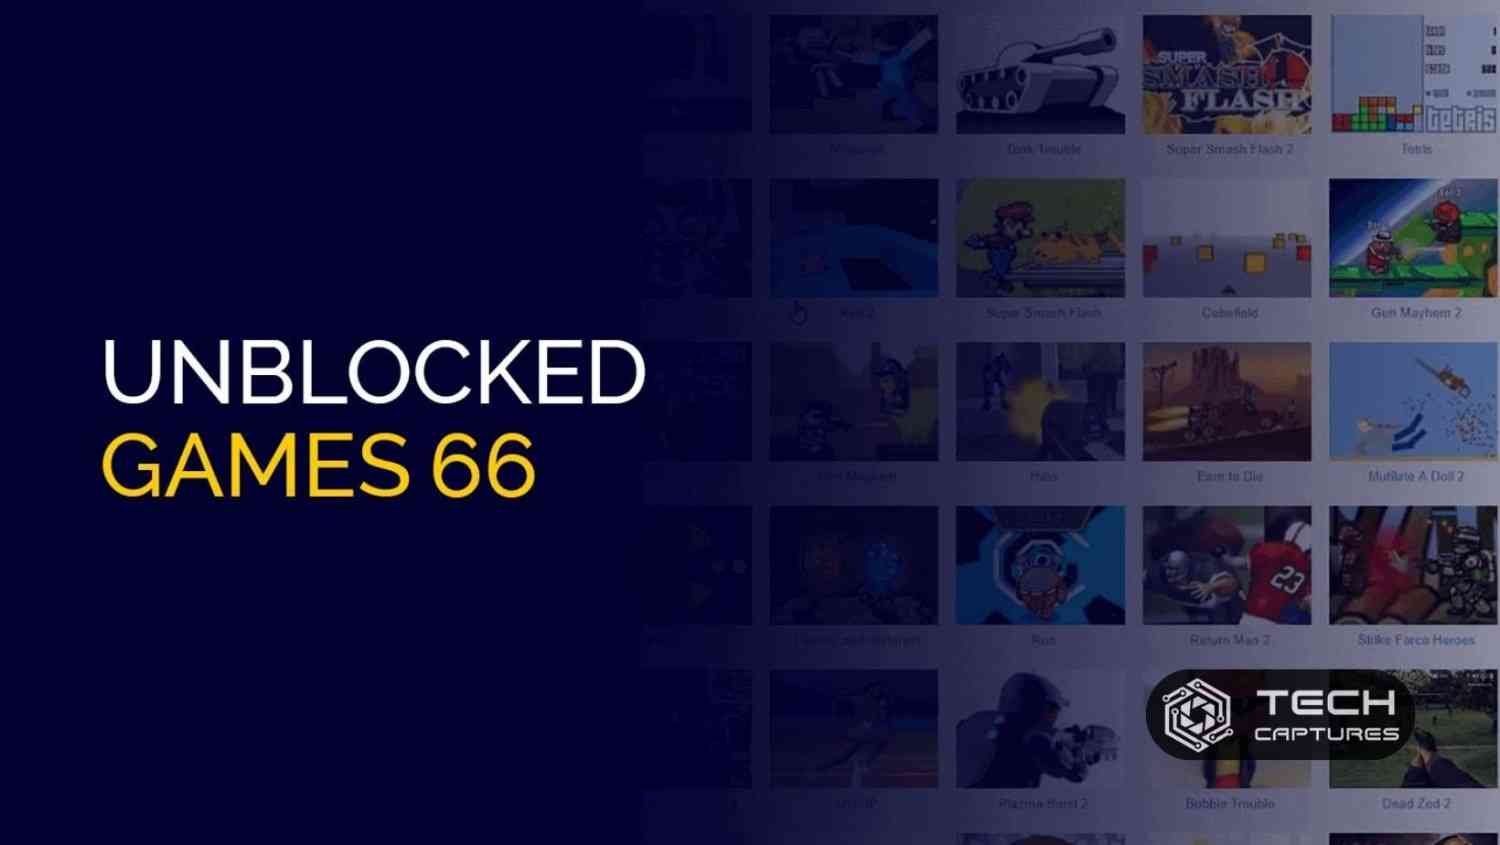 Unblocked Games WTF: A Gateway to Endless Gaming Fun - Taper Fade - Most  Interesting News